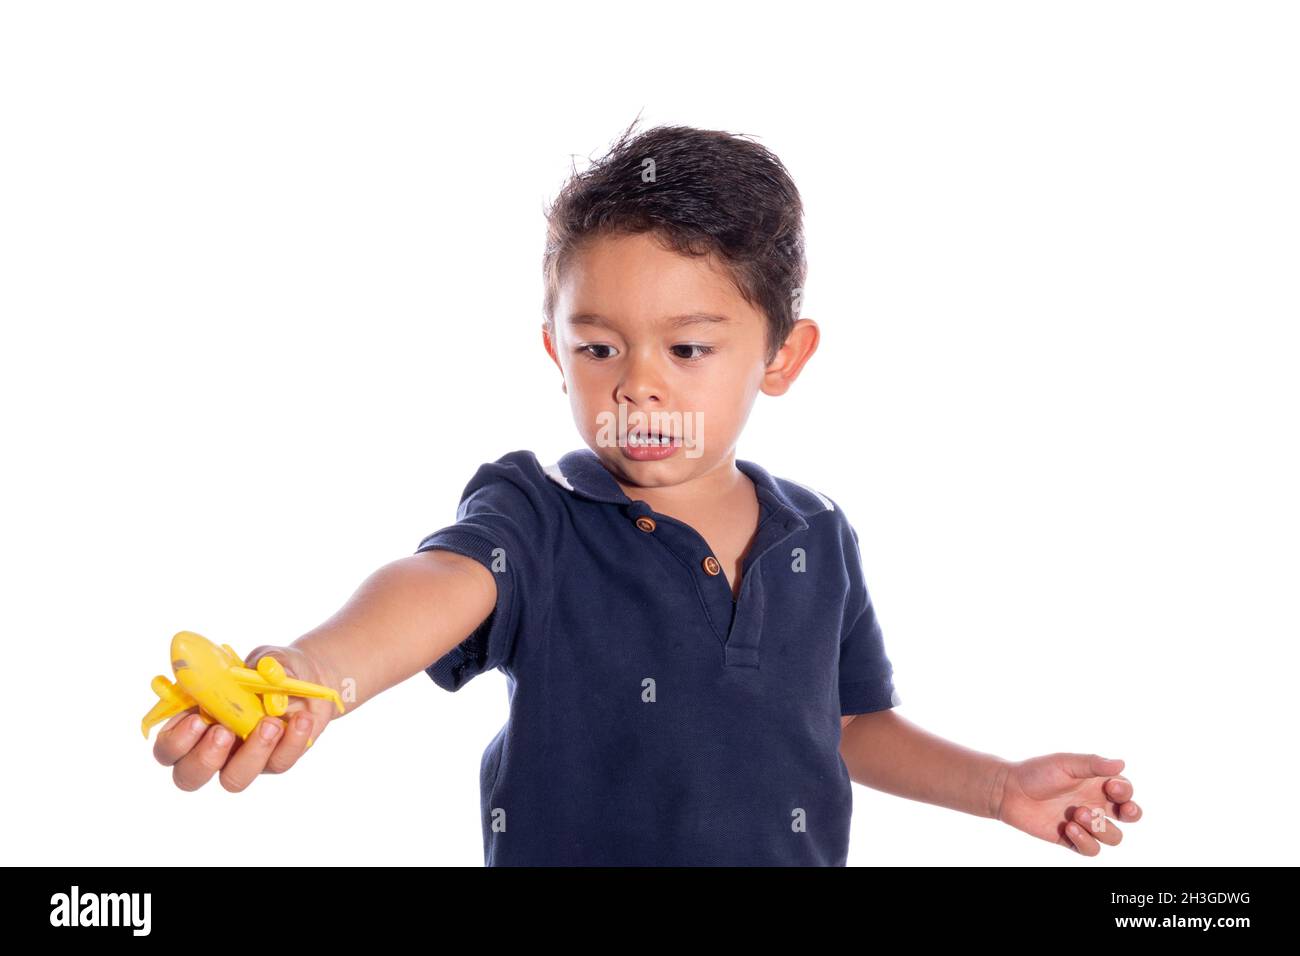 Boy playing with toy plane, isolated on white background. Latin child playing in front of camera. Stock Photo